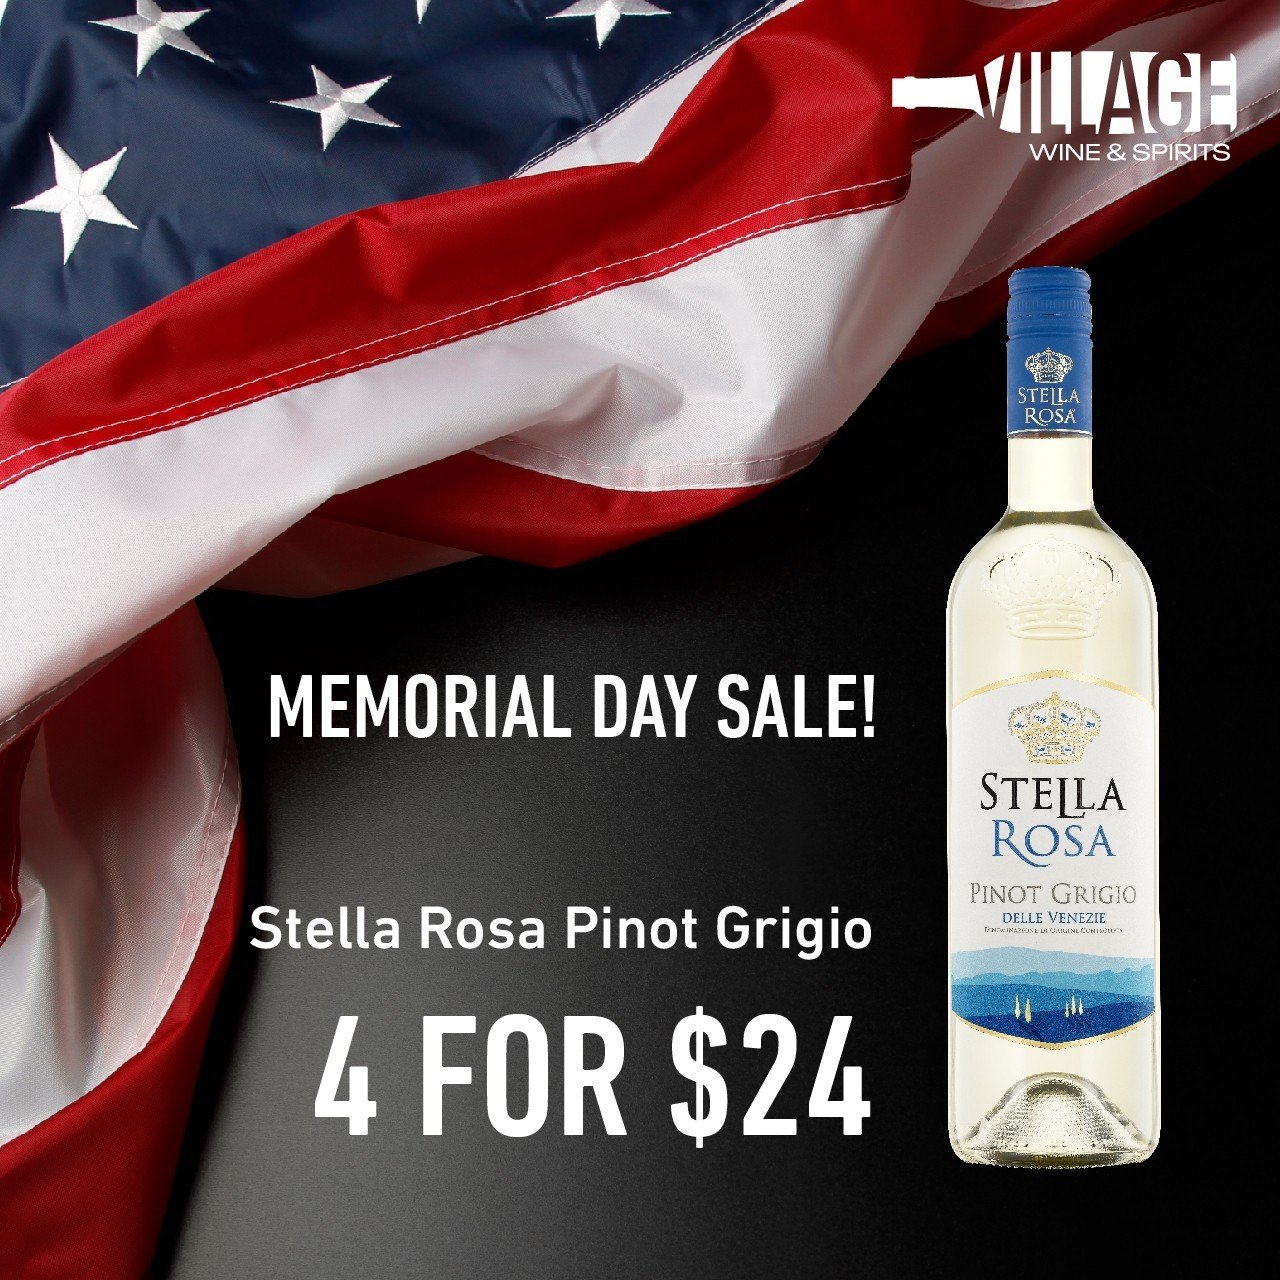 NOW THROUGH MEMORIAL DAY! Get loaded up for the weekend with these hot deals! Fun Ready-to-drink items, high-end exclusive single barrel bourbons, and DEEP WINE DISCOUNTS!